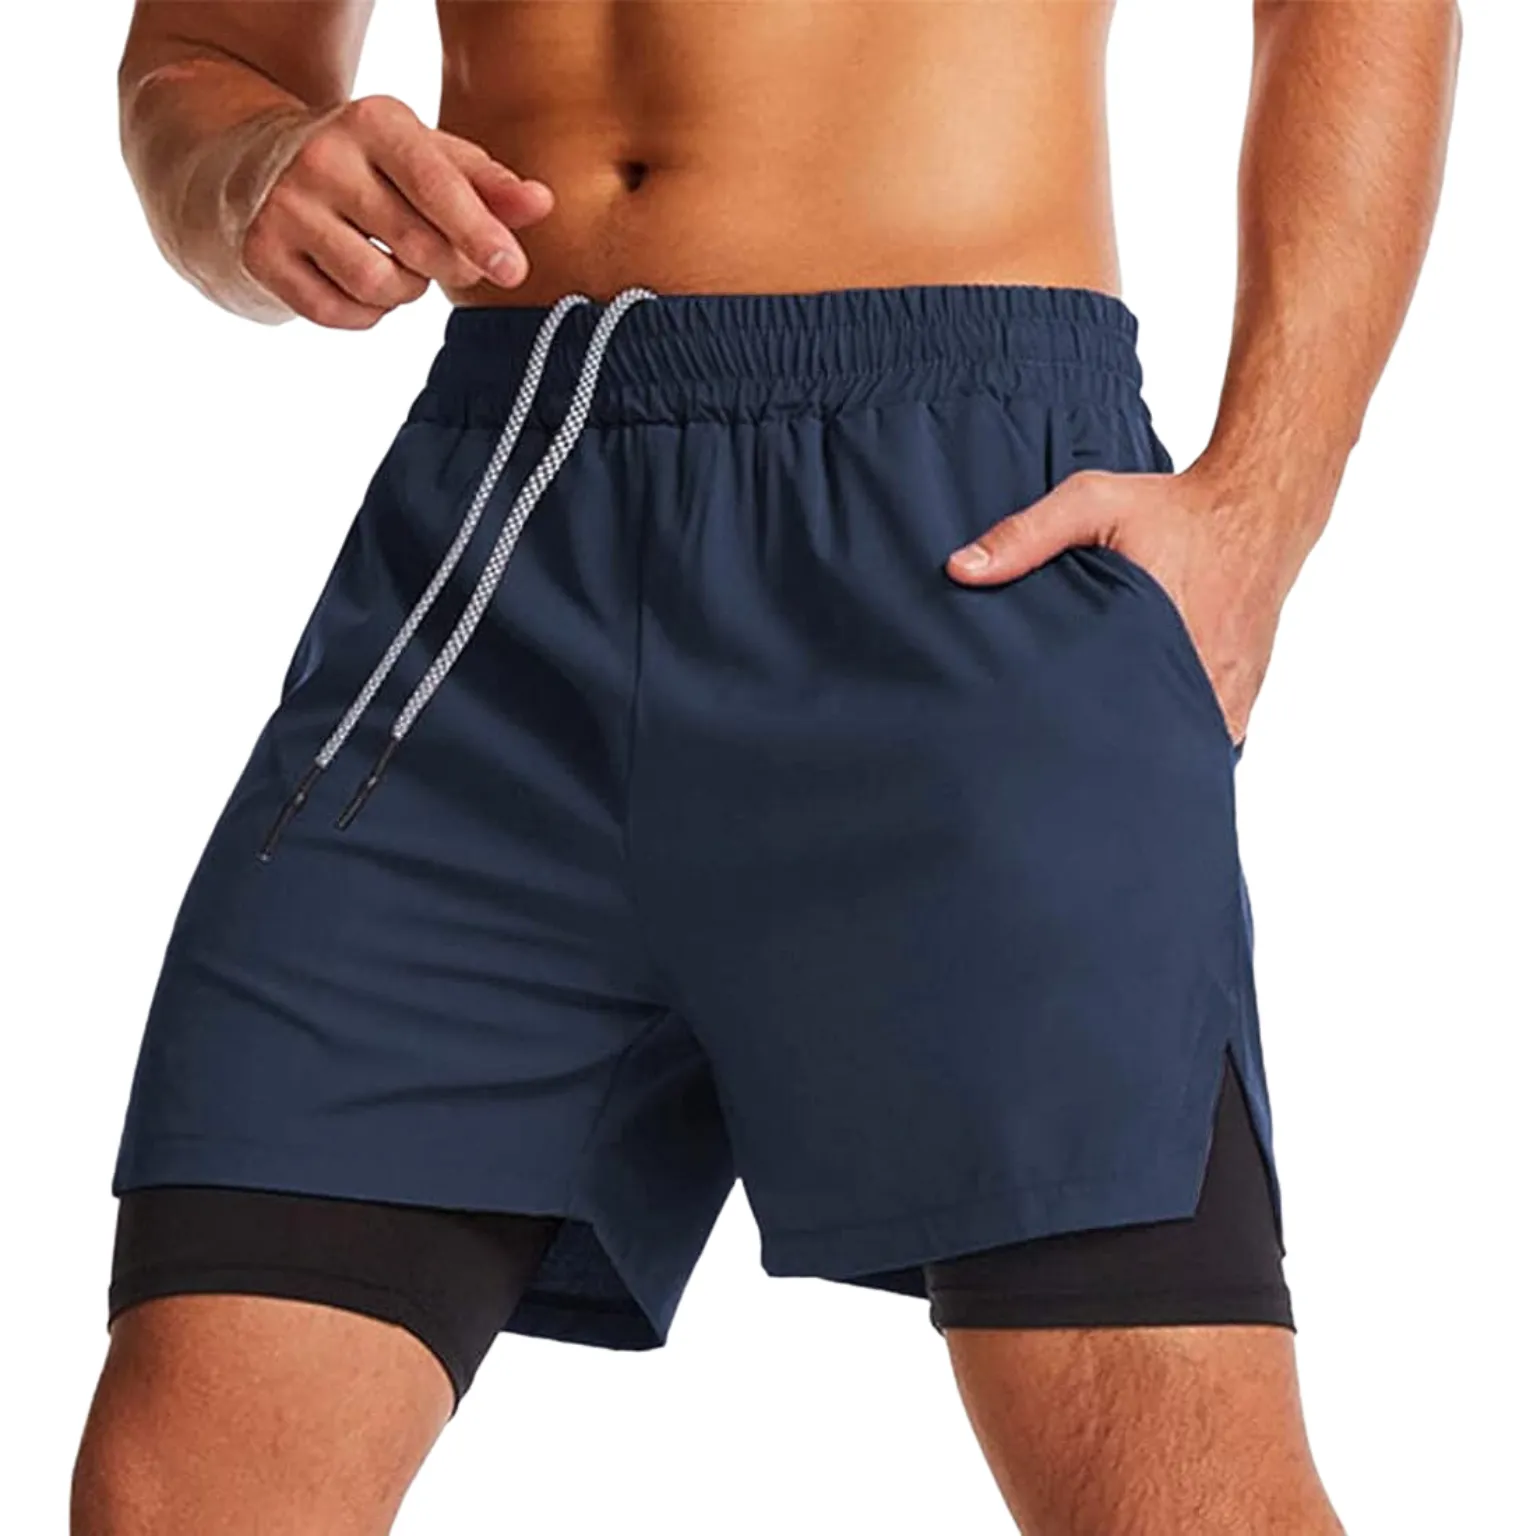 Slim Fit Shorts manufacturing with superior quality